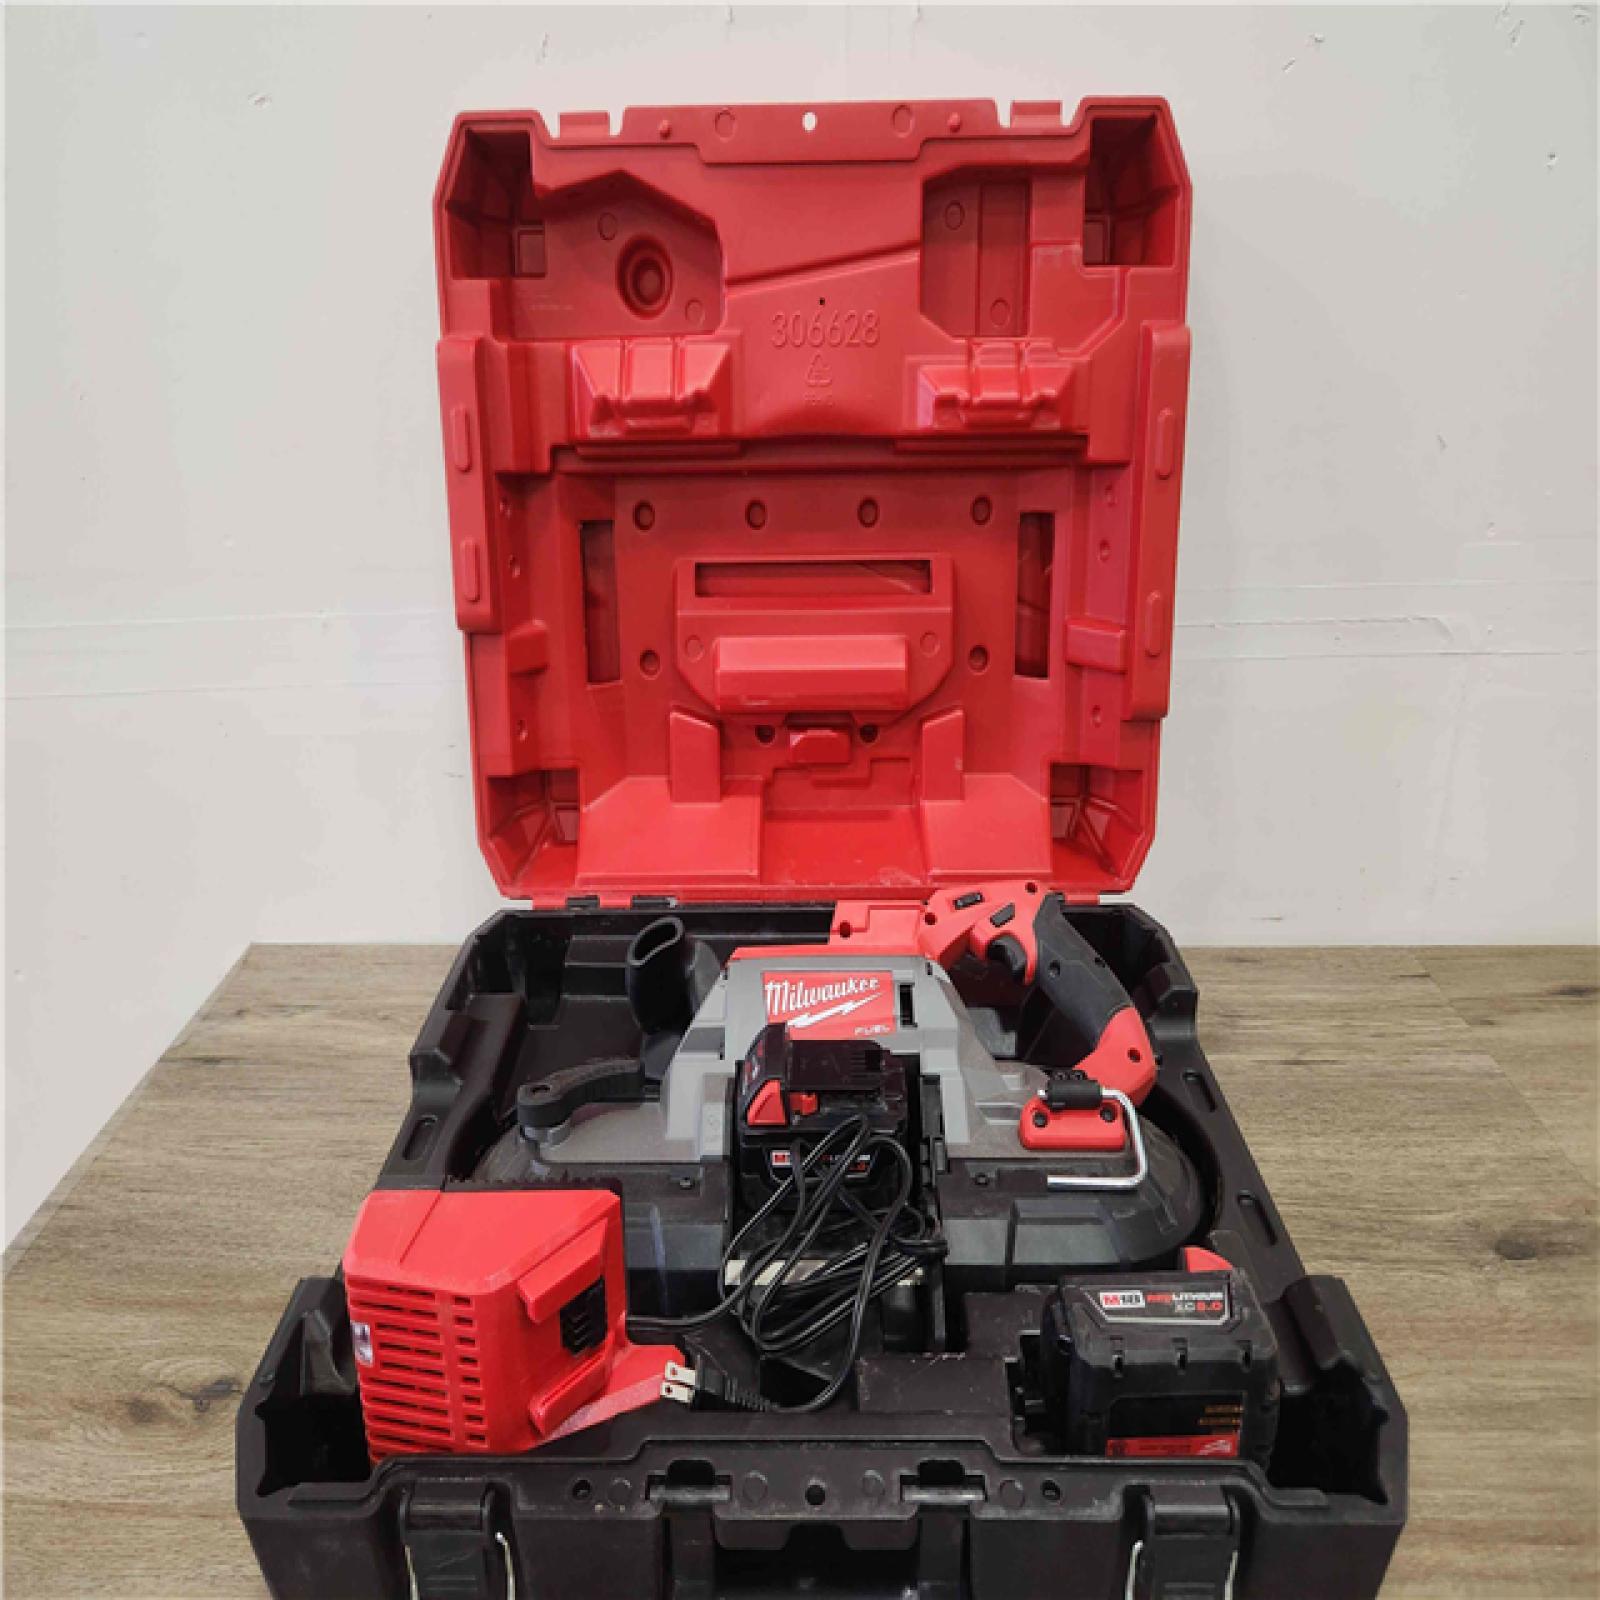 Phoenix Location Good Condition Milwaukee M18 FUEL 18V Lithium-Ion Brushless Cordless Deep Cut Band Saw with Two 5.0Ah Batteries, Charger, Hard Case 2729-22